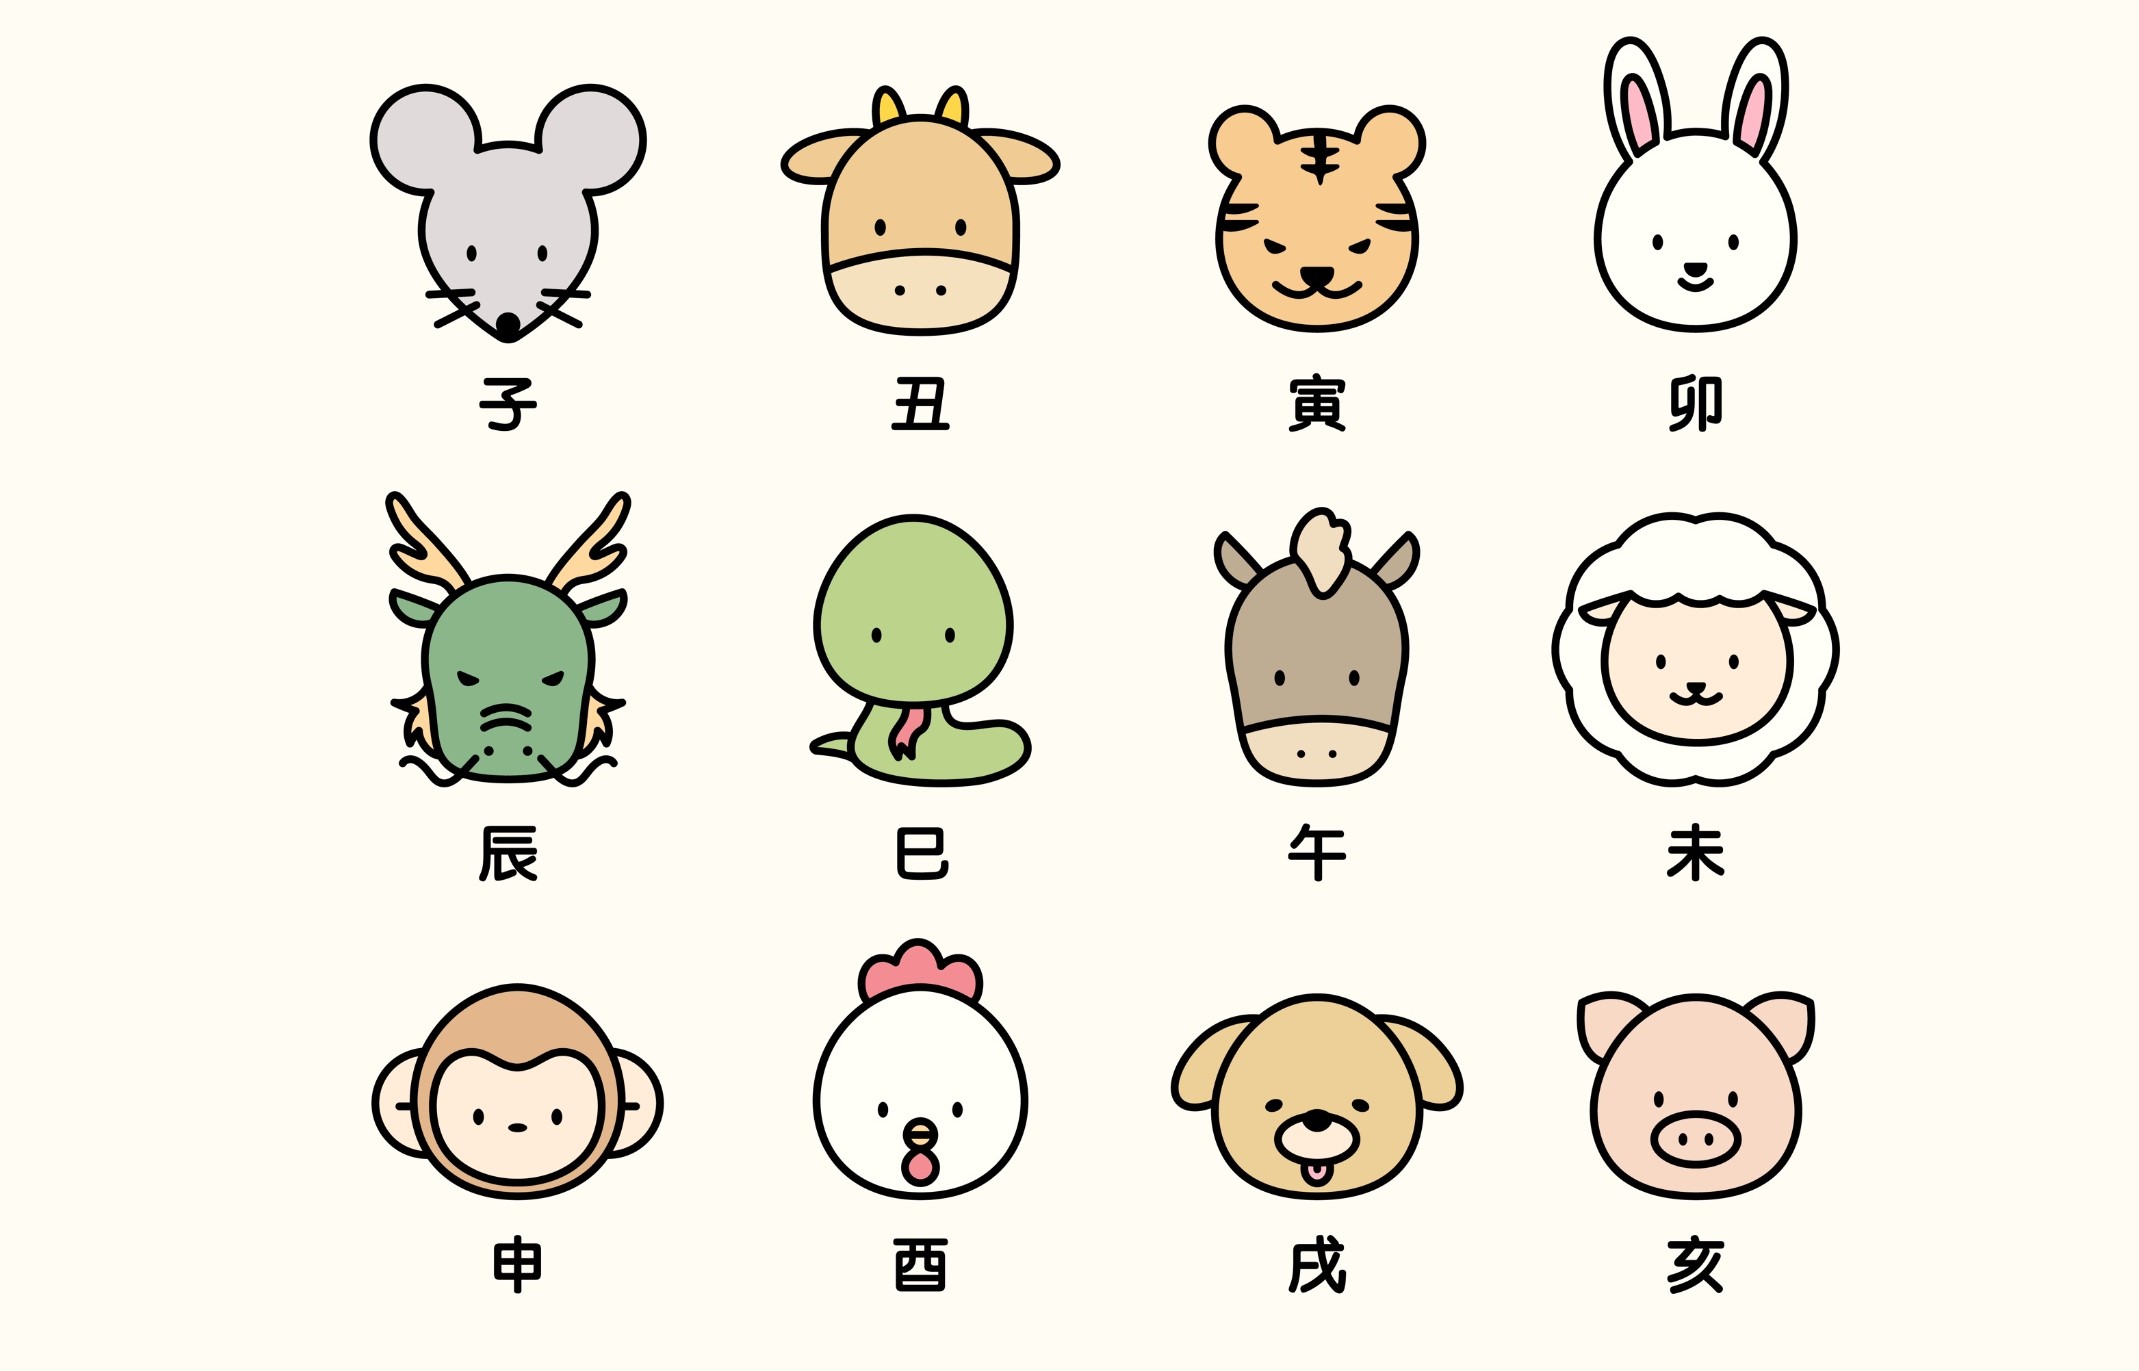 Cartoon images of animals from the Chinese Zodiac